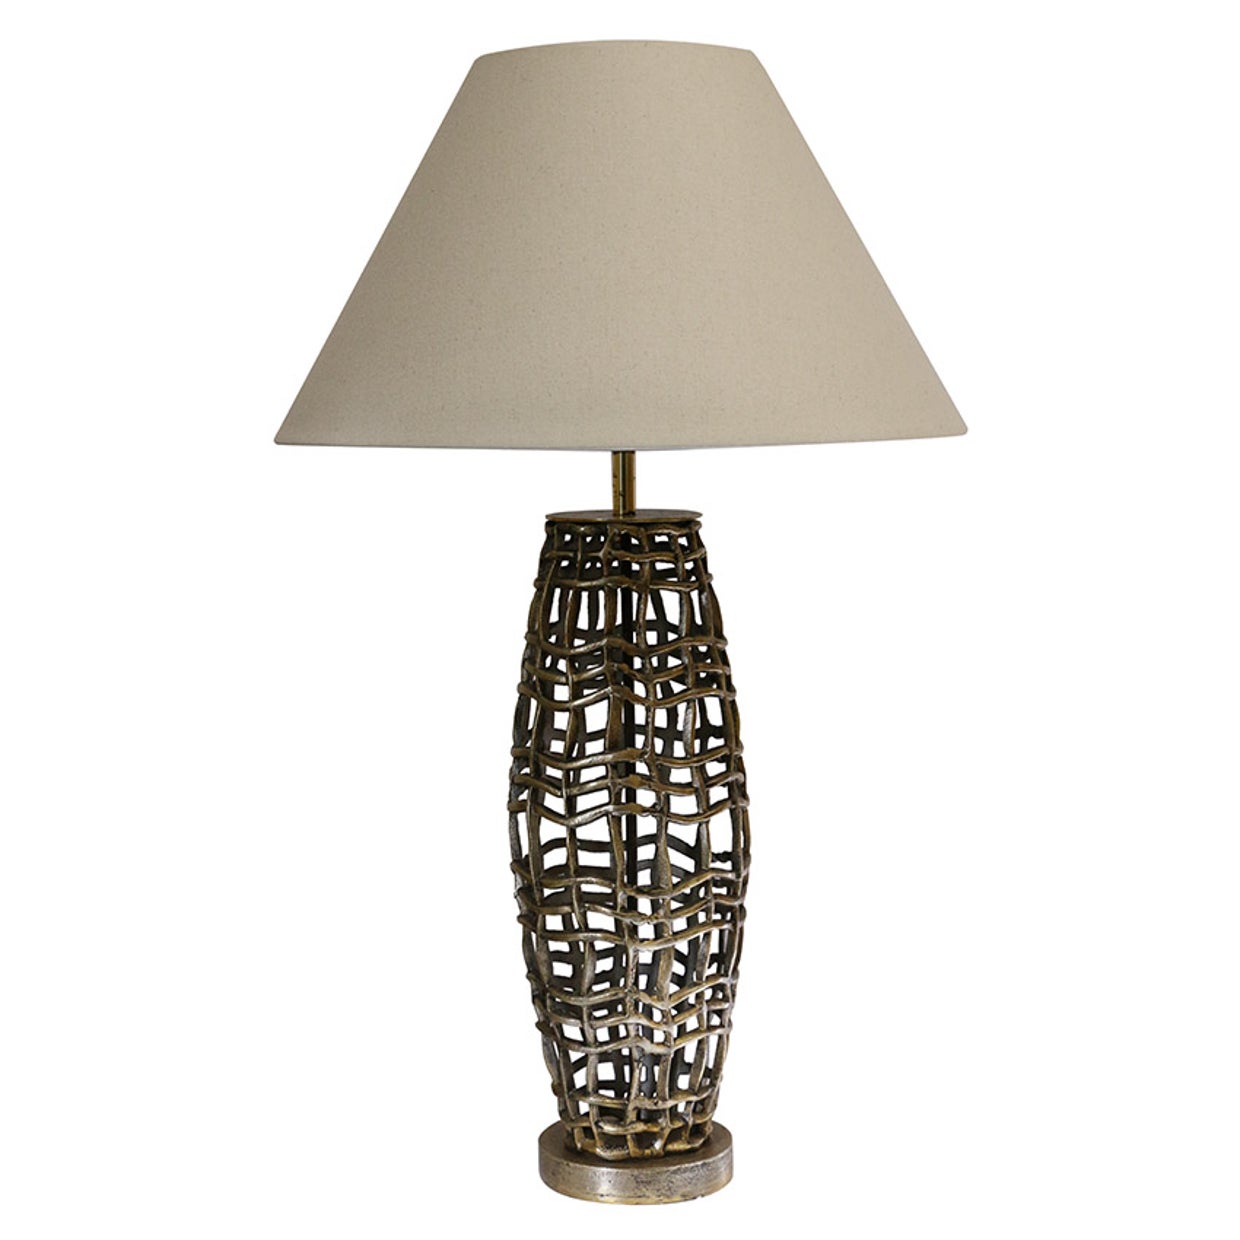 ZURICH METAL WEAVE LAMP BASE IN OLD BRASS FINISH